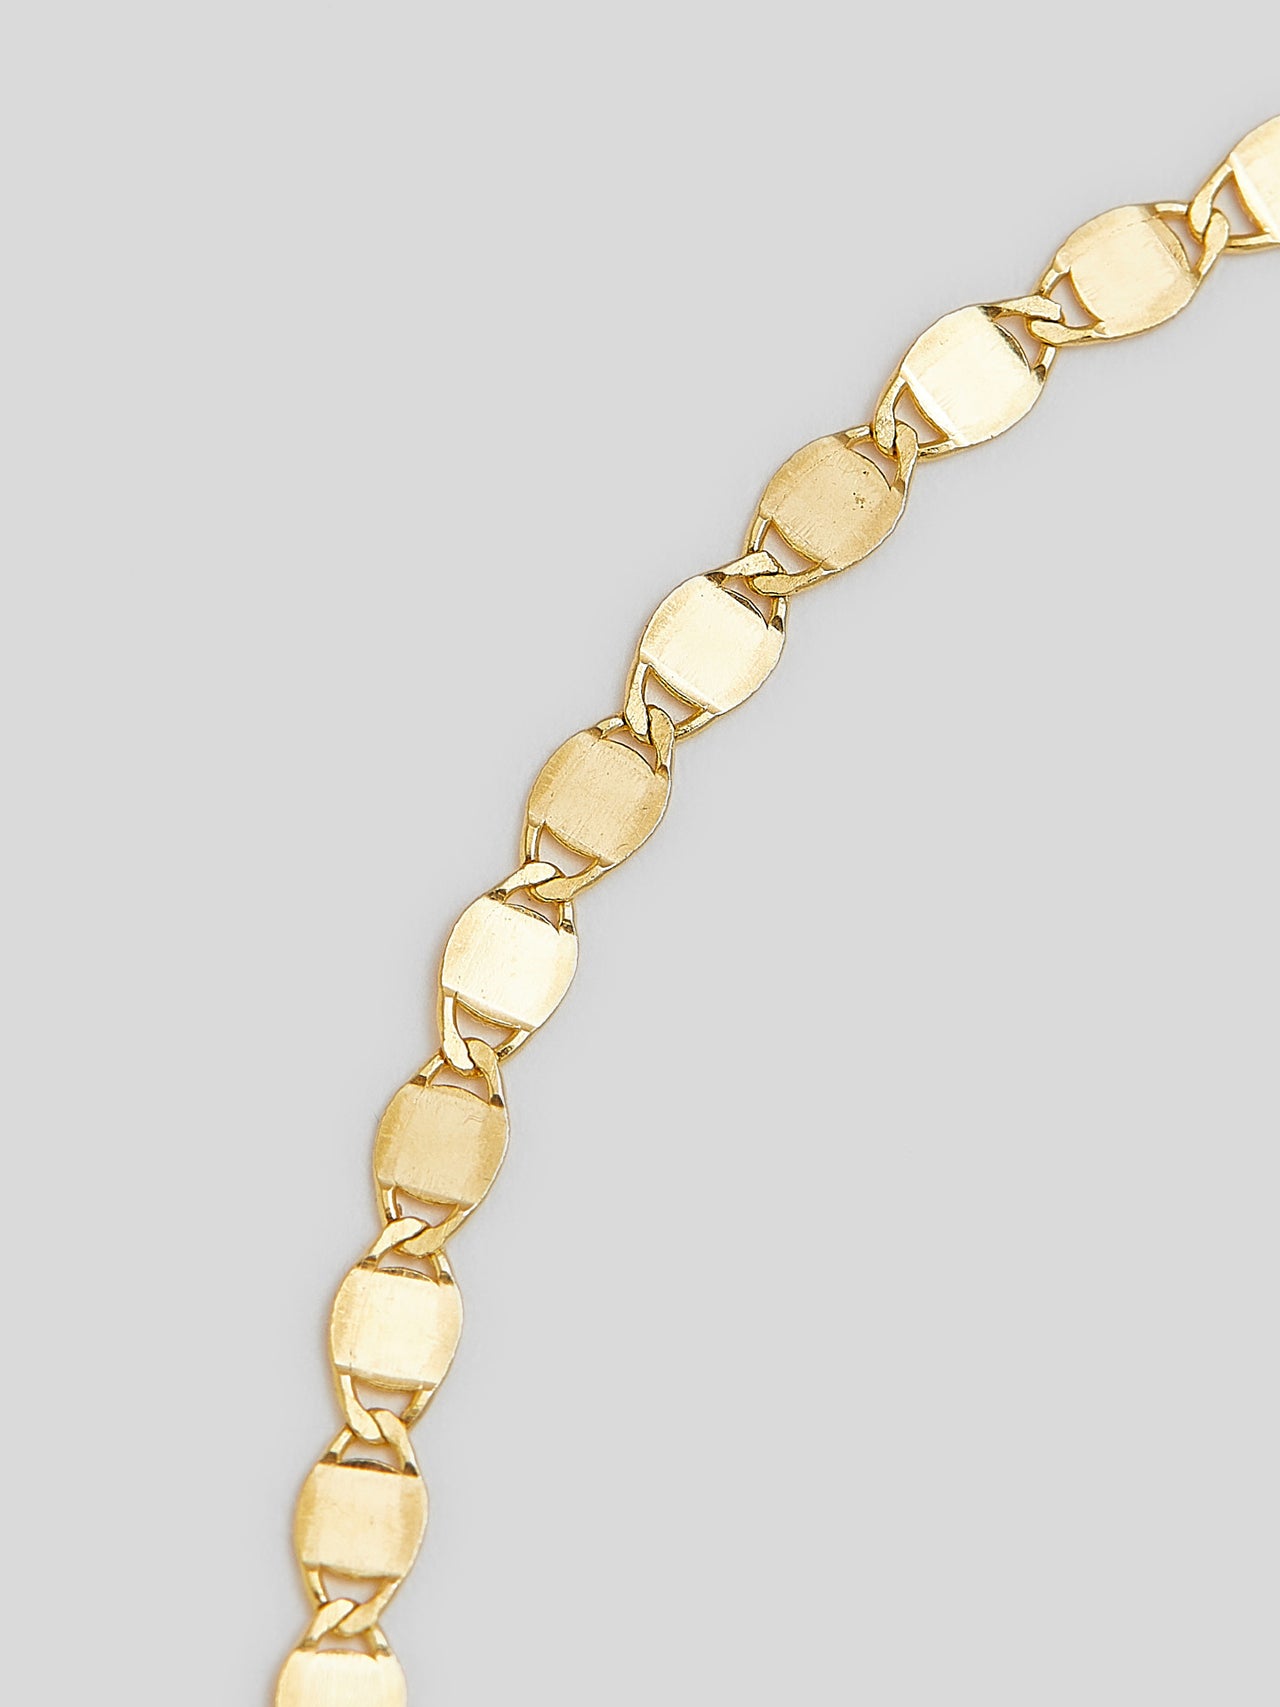 Close up of chain on Product image of 14kt yellow gold valentino chain bracelet on white background. 